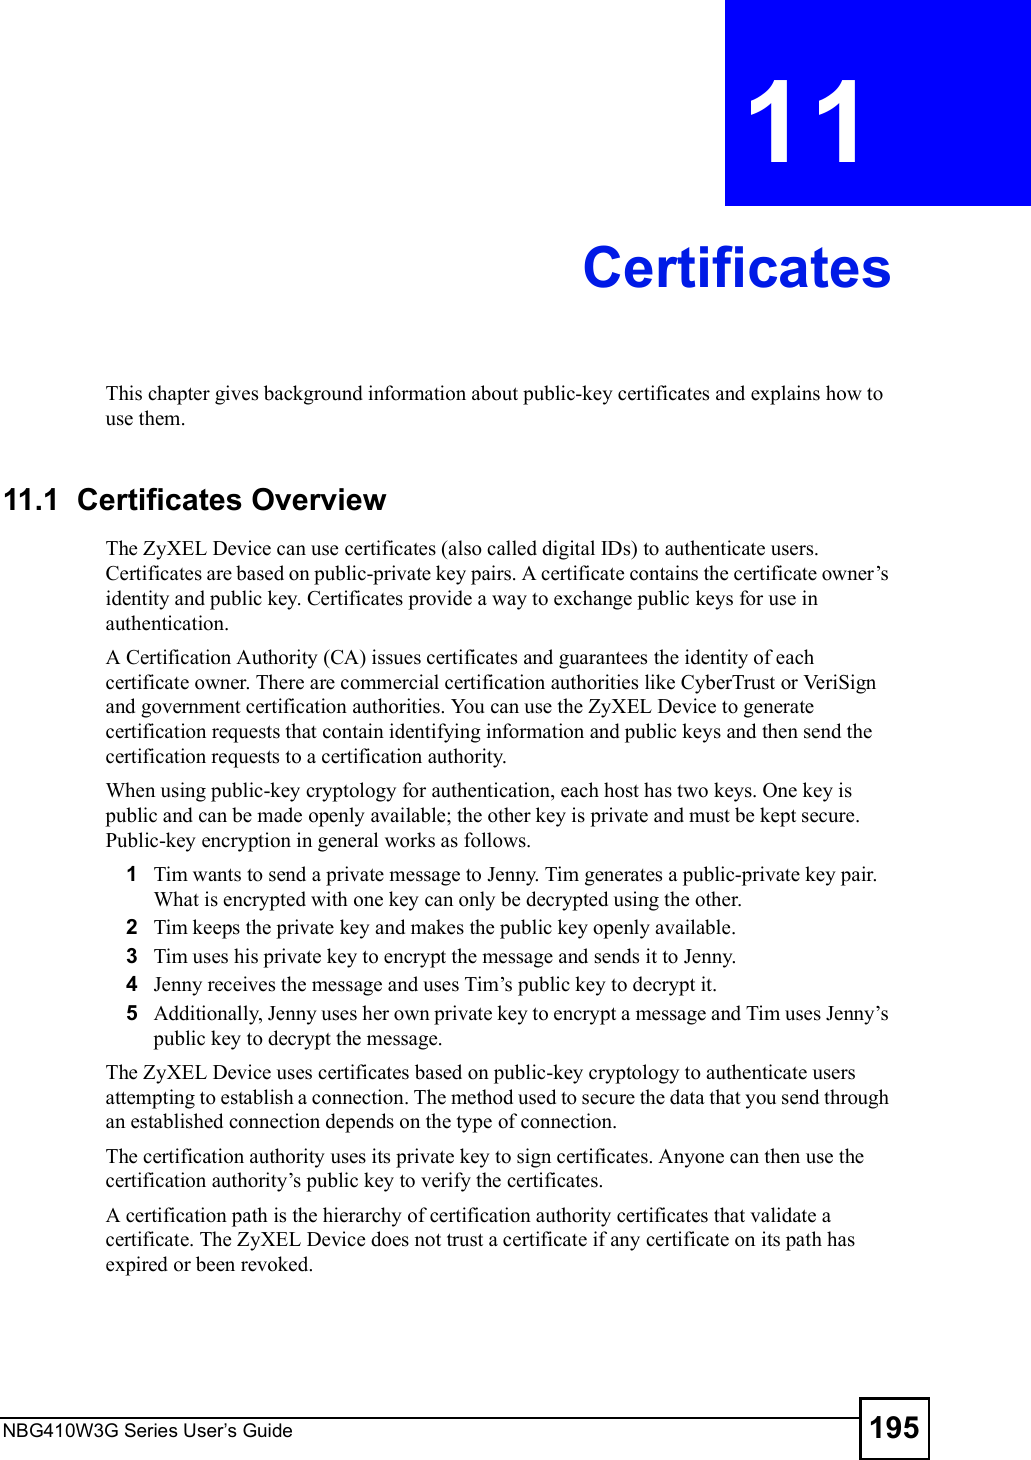 NBG410W3G Series User s Guide 195CHAPTER  11 CertificatesThis chapter gives background information about public-key certificates and explains how to use them.11.1  Certificates OverviewThe ZyXEL Device can use certificates (also called digital IDs) to authenticate users. Certificates are based on public-private key pairs. A certificate contains the certificate owner!s identity and public key. Certificates provide a way to exchange public keys for use in authentication. A Certification Authority (CA) issues certificates and guarantees the identity of each certificate owner. There are commercial certification authorities like CyberTrust or VeriSign and government certification authorities. You can use the ZyXEL Device to generate certification requests that contain identifying information and public keys and then send the certification requests to a certification authority. When using public-key cryptology for authentication, each host has two keys. One key is public and can be made openly available; the other key is private and must be kept secure. Public-key encryption in general works as follows. 1Tim wants to send a private message to Jenny. Tim generates a public-private key pair. What is encrypted with one key can only be decrypted using the other.2Tim keeps the private key and makes the public key openly available.3Tim uses his private key to encrypt the message and sends it to Jenny.4Jenny receives the message and uses Tim!s public key to decrypt it.5Additionally, Jenny uses her own private key to encrypt a message and Tim uses Jenny!s public key to decrypt the message.The ZyXEL Device uses certificates based on public-key cryptology to authenticate users attempting to establish a connection. The method used to secure the data that you send through an established connection depends on the type of connection. The certification authority uses its private key to sign certificates. Anyone can then use the certification authority!s public key to verify the certificates.A certification path is the hierarchy of certification authority certificates that validate a certificate. The ZyXEL Device does not trust a certificate if any certificate on its path has expired or been revoked. 